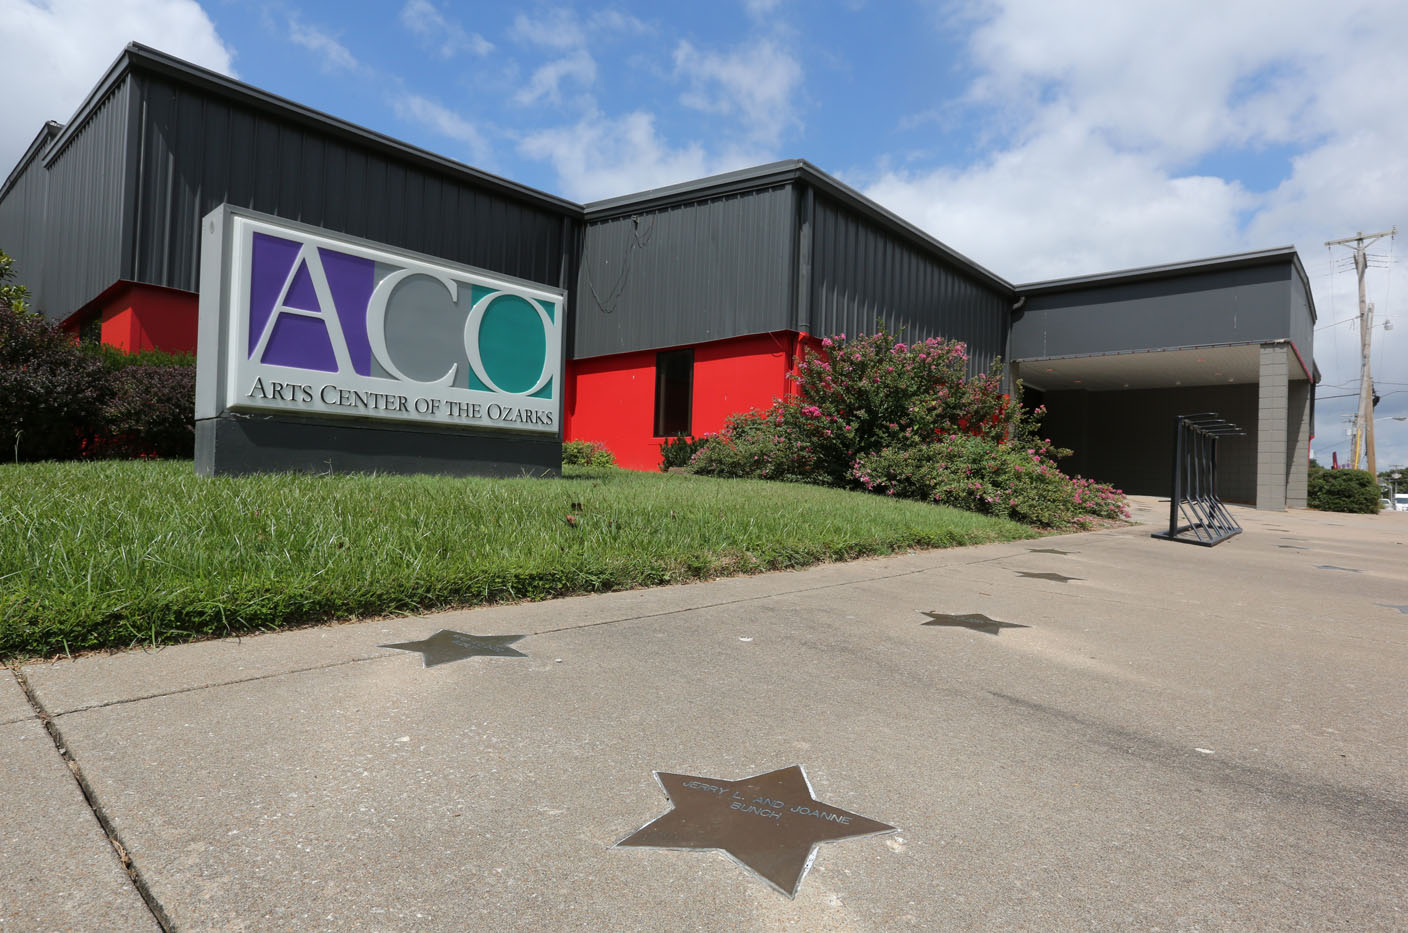 New group takes over ACO building in Springdale